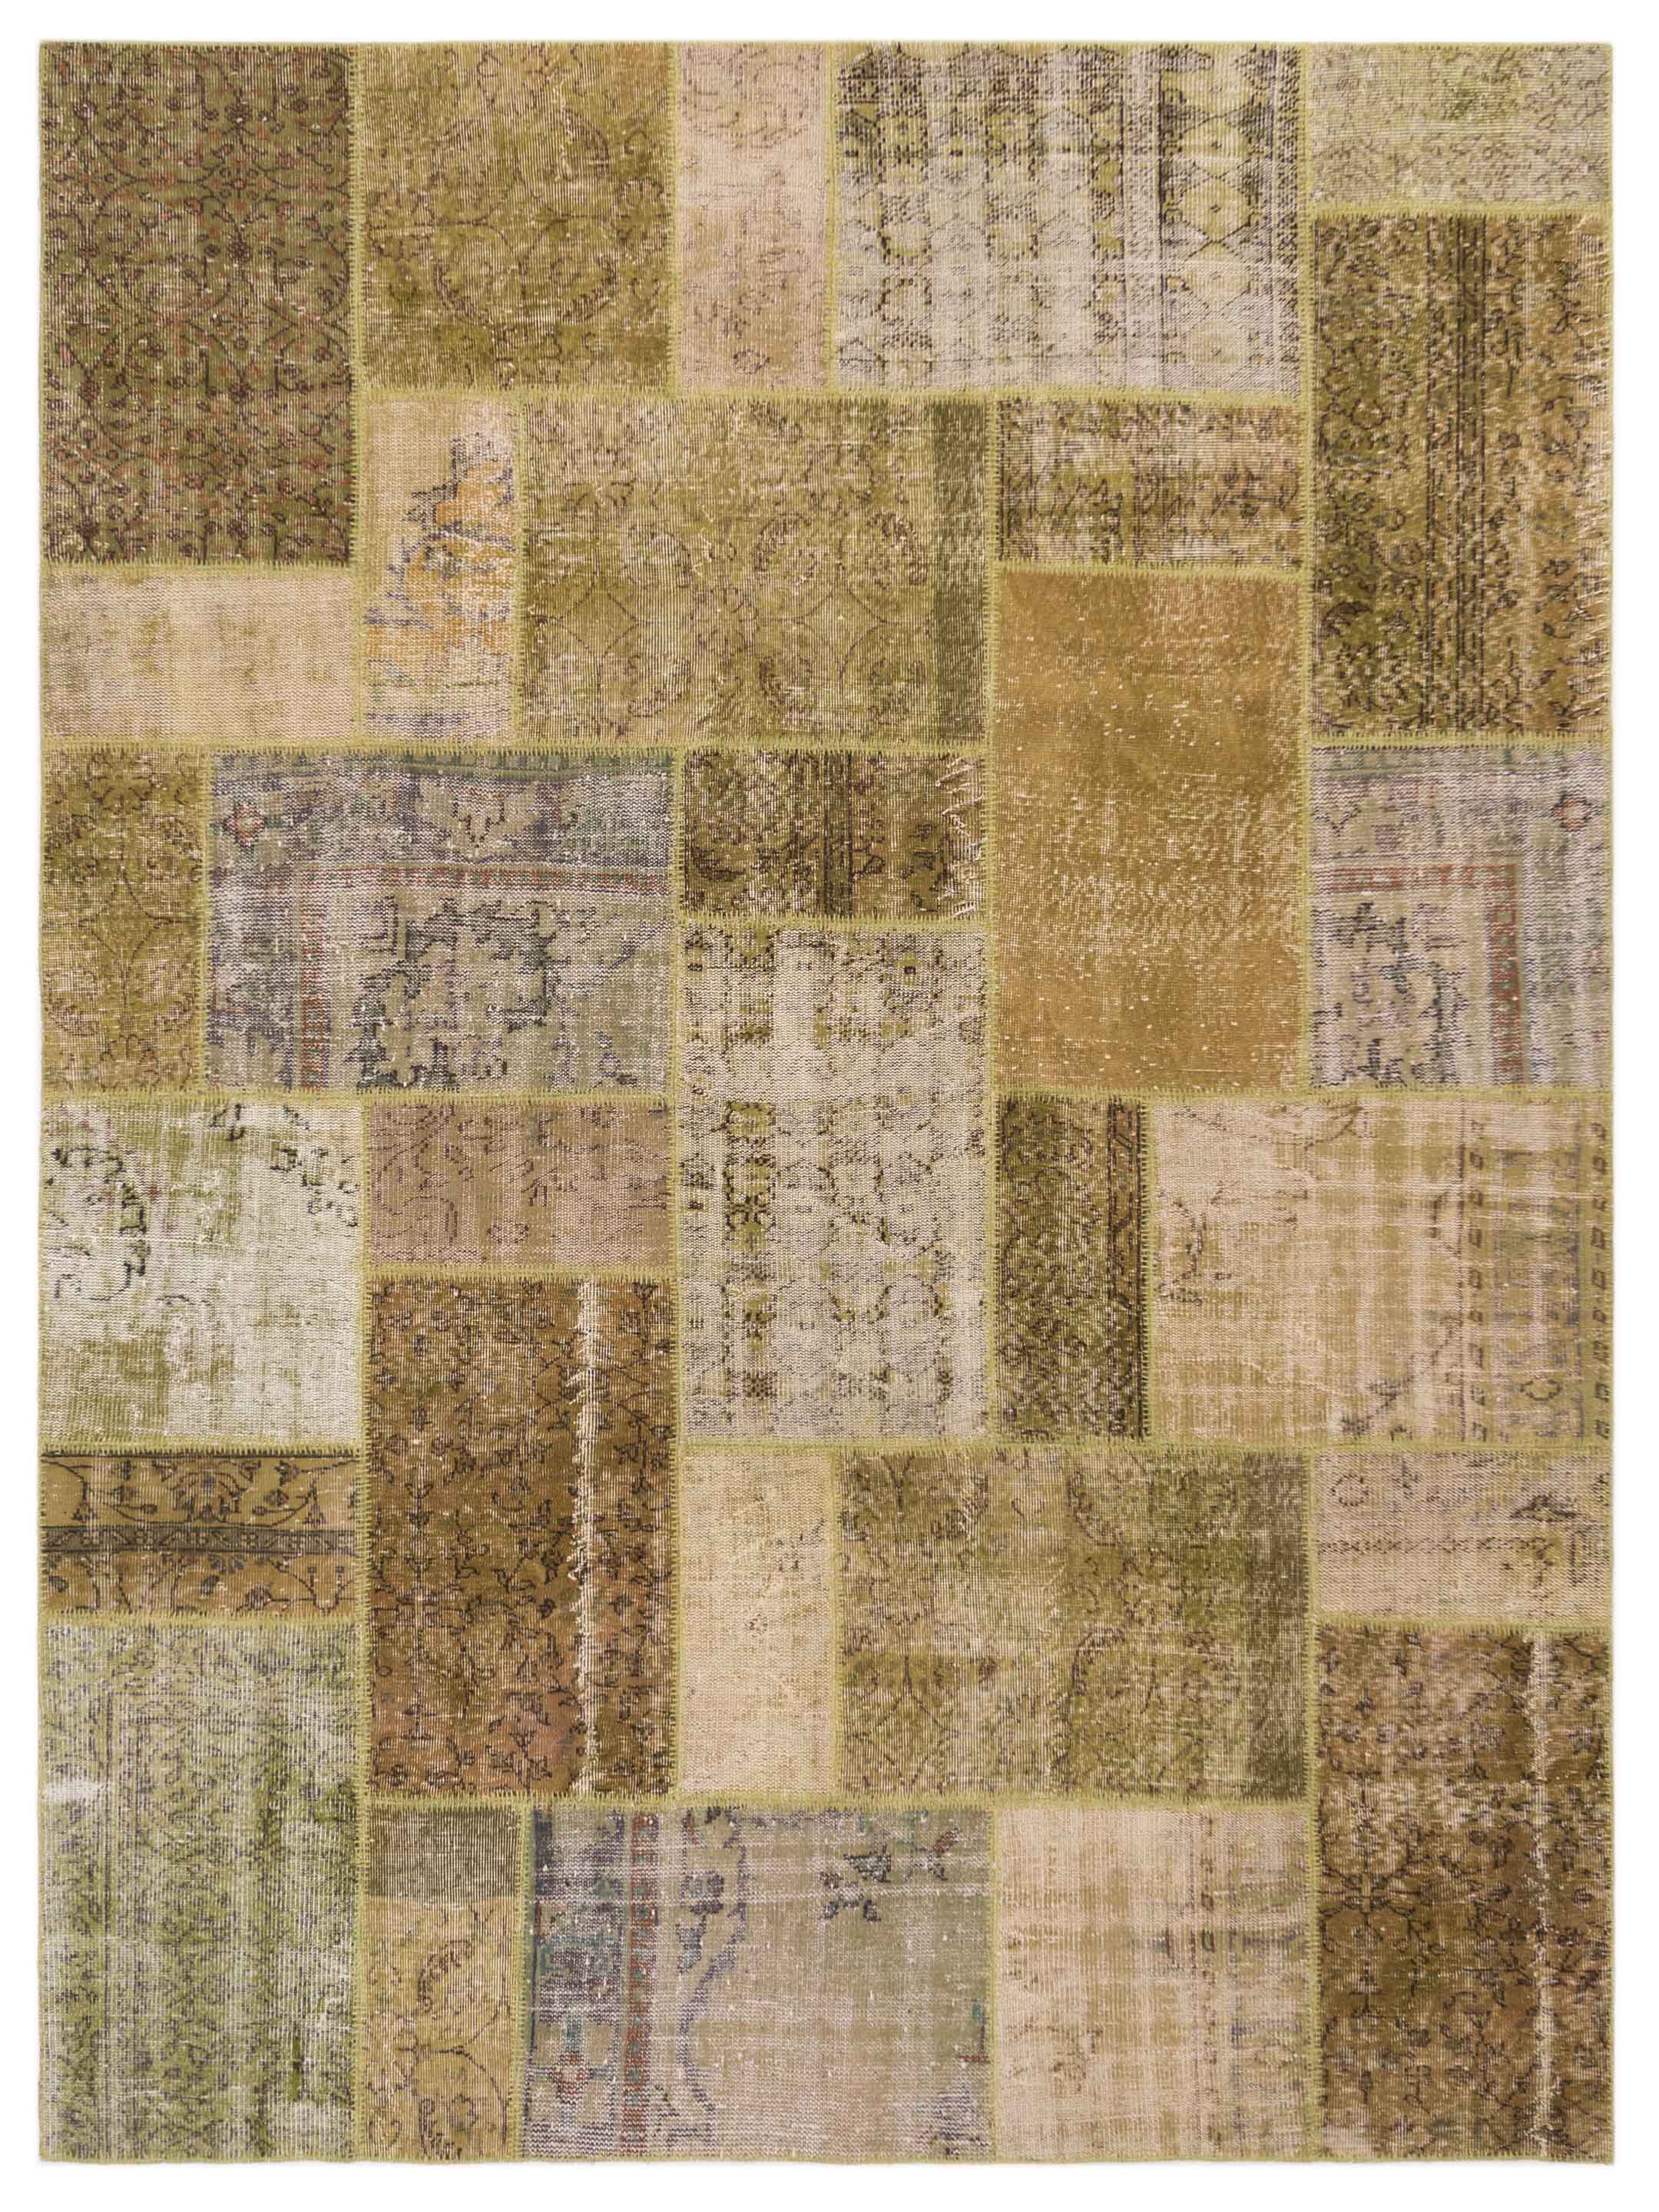 Green patchwork hand-knotted Turkish area rug	